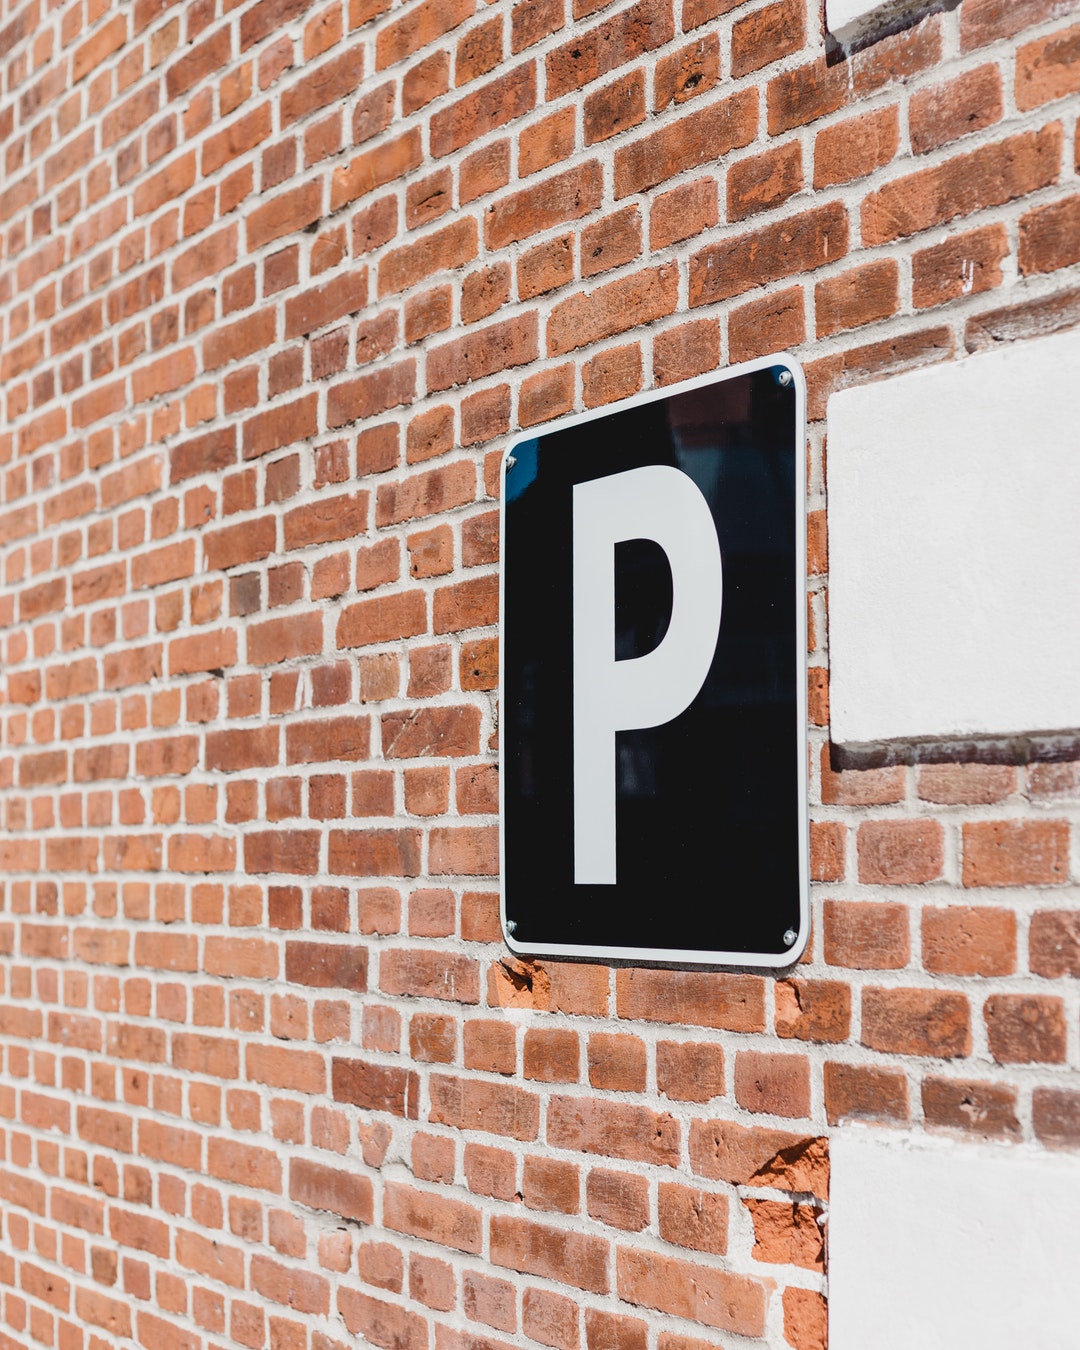 parking sign on brick wall